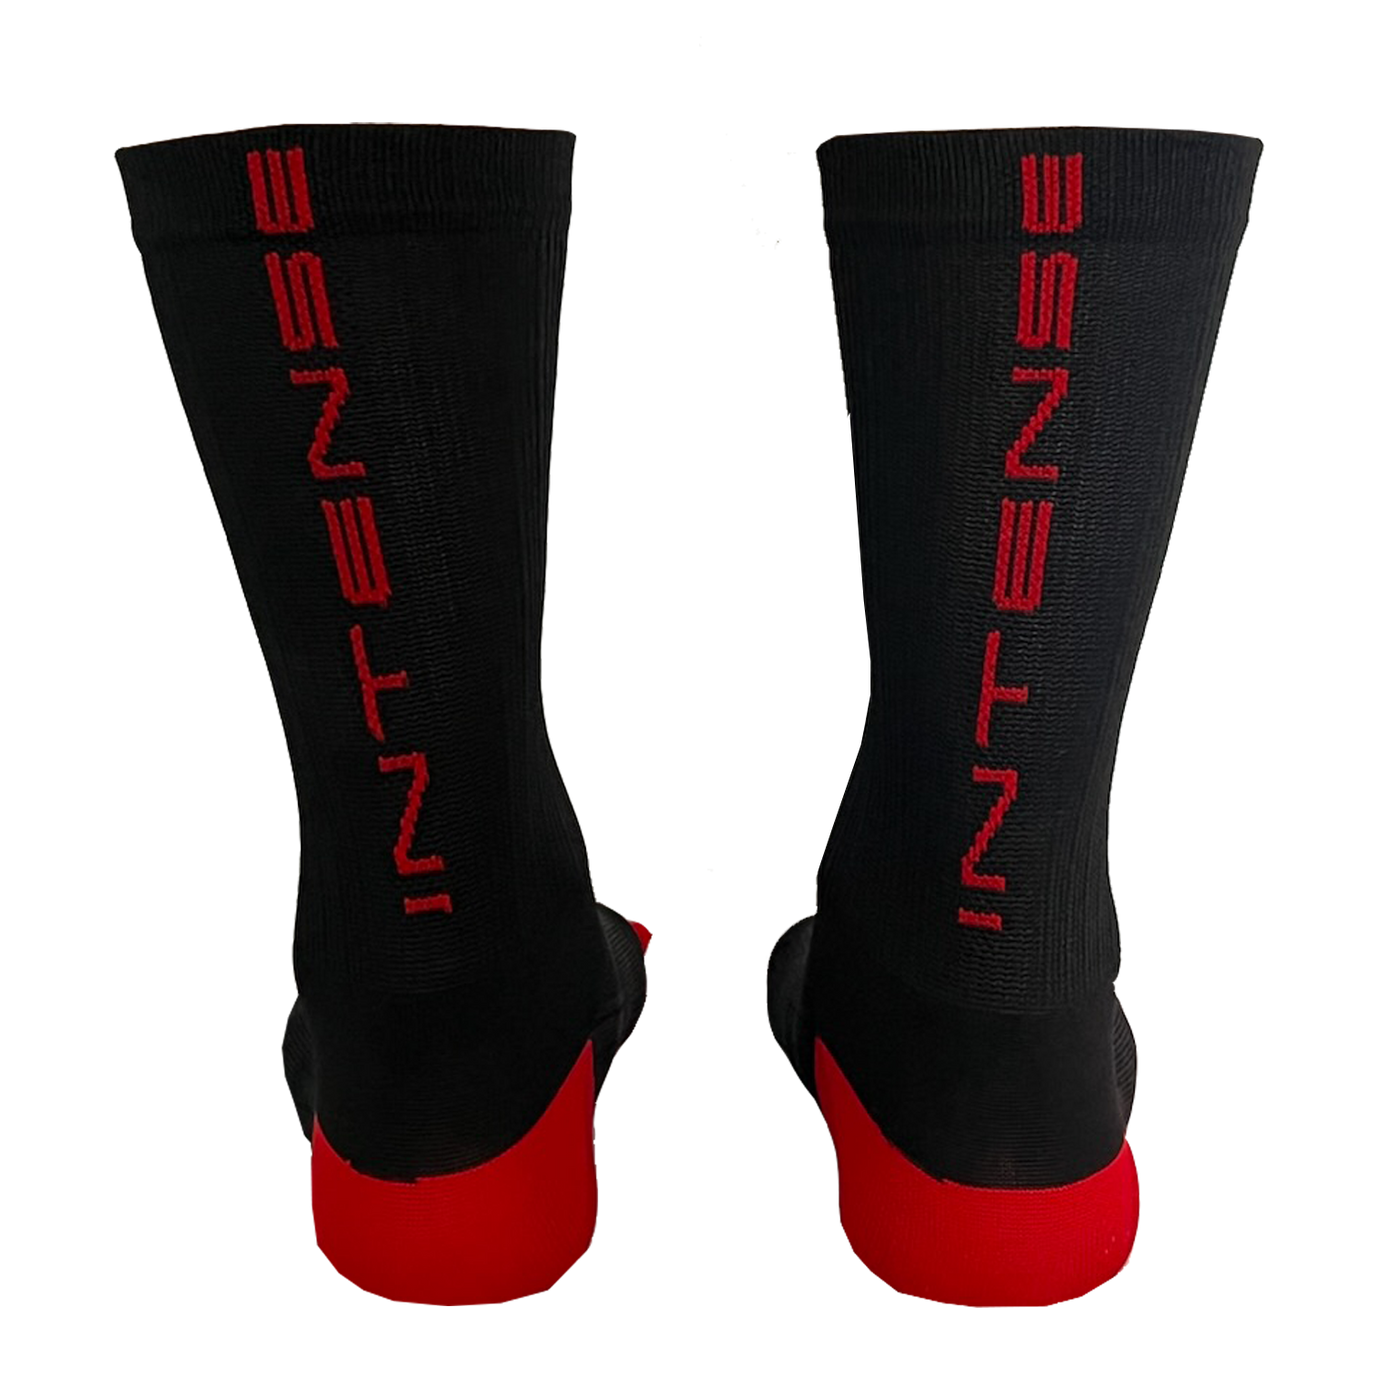 Shop INTENSE Cycles Compression Everyday socks